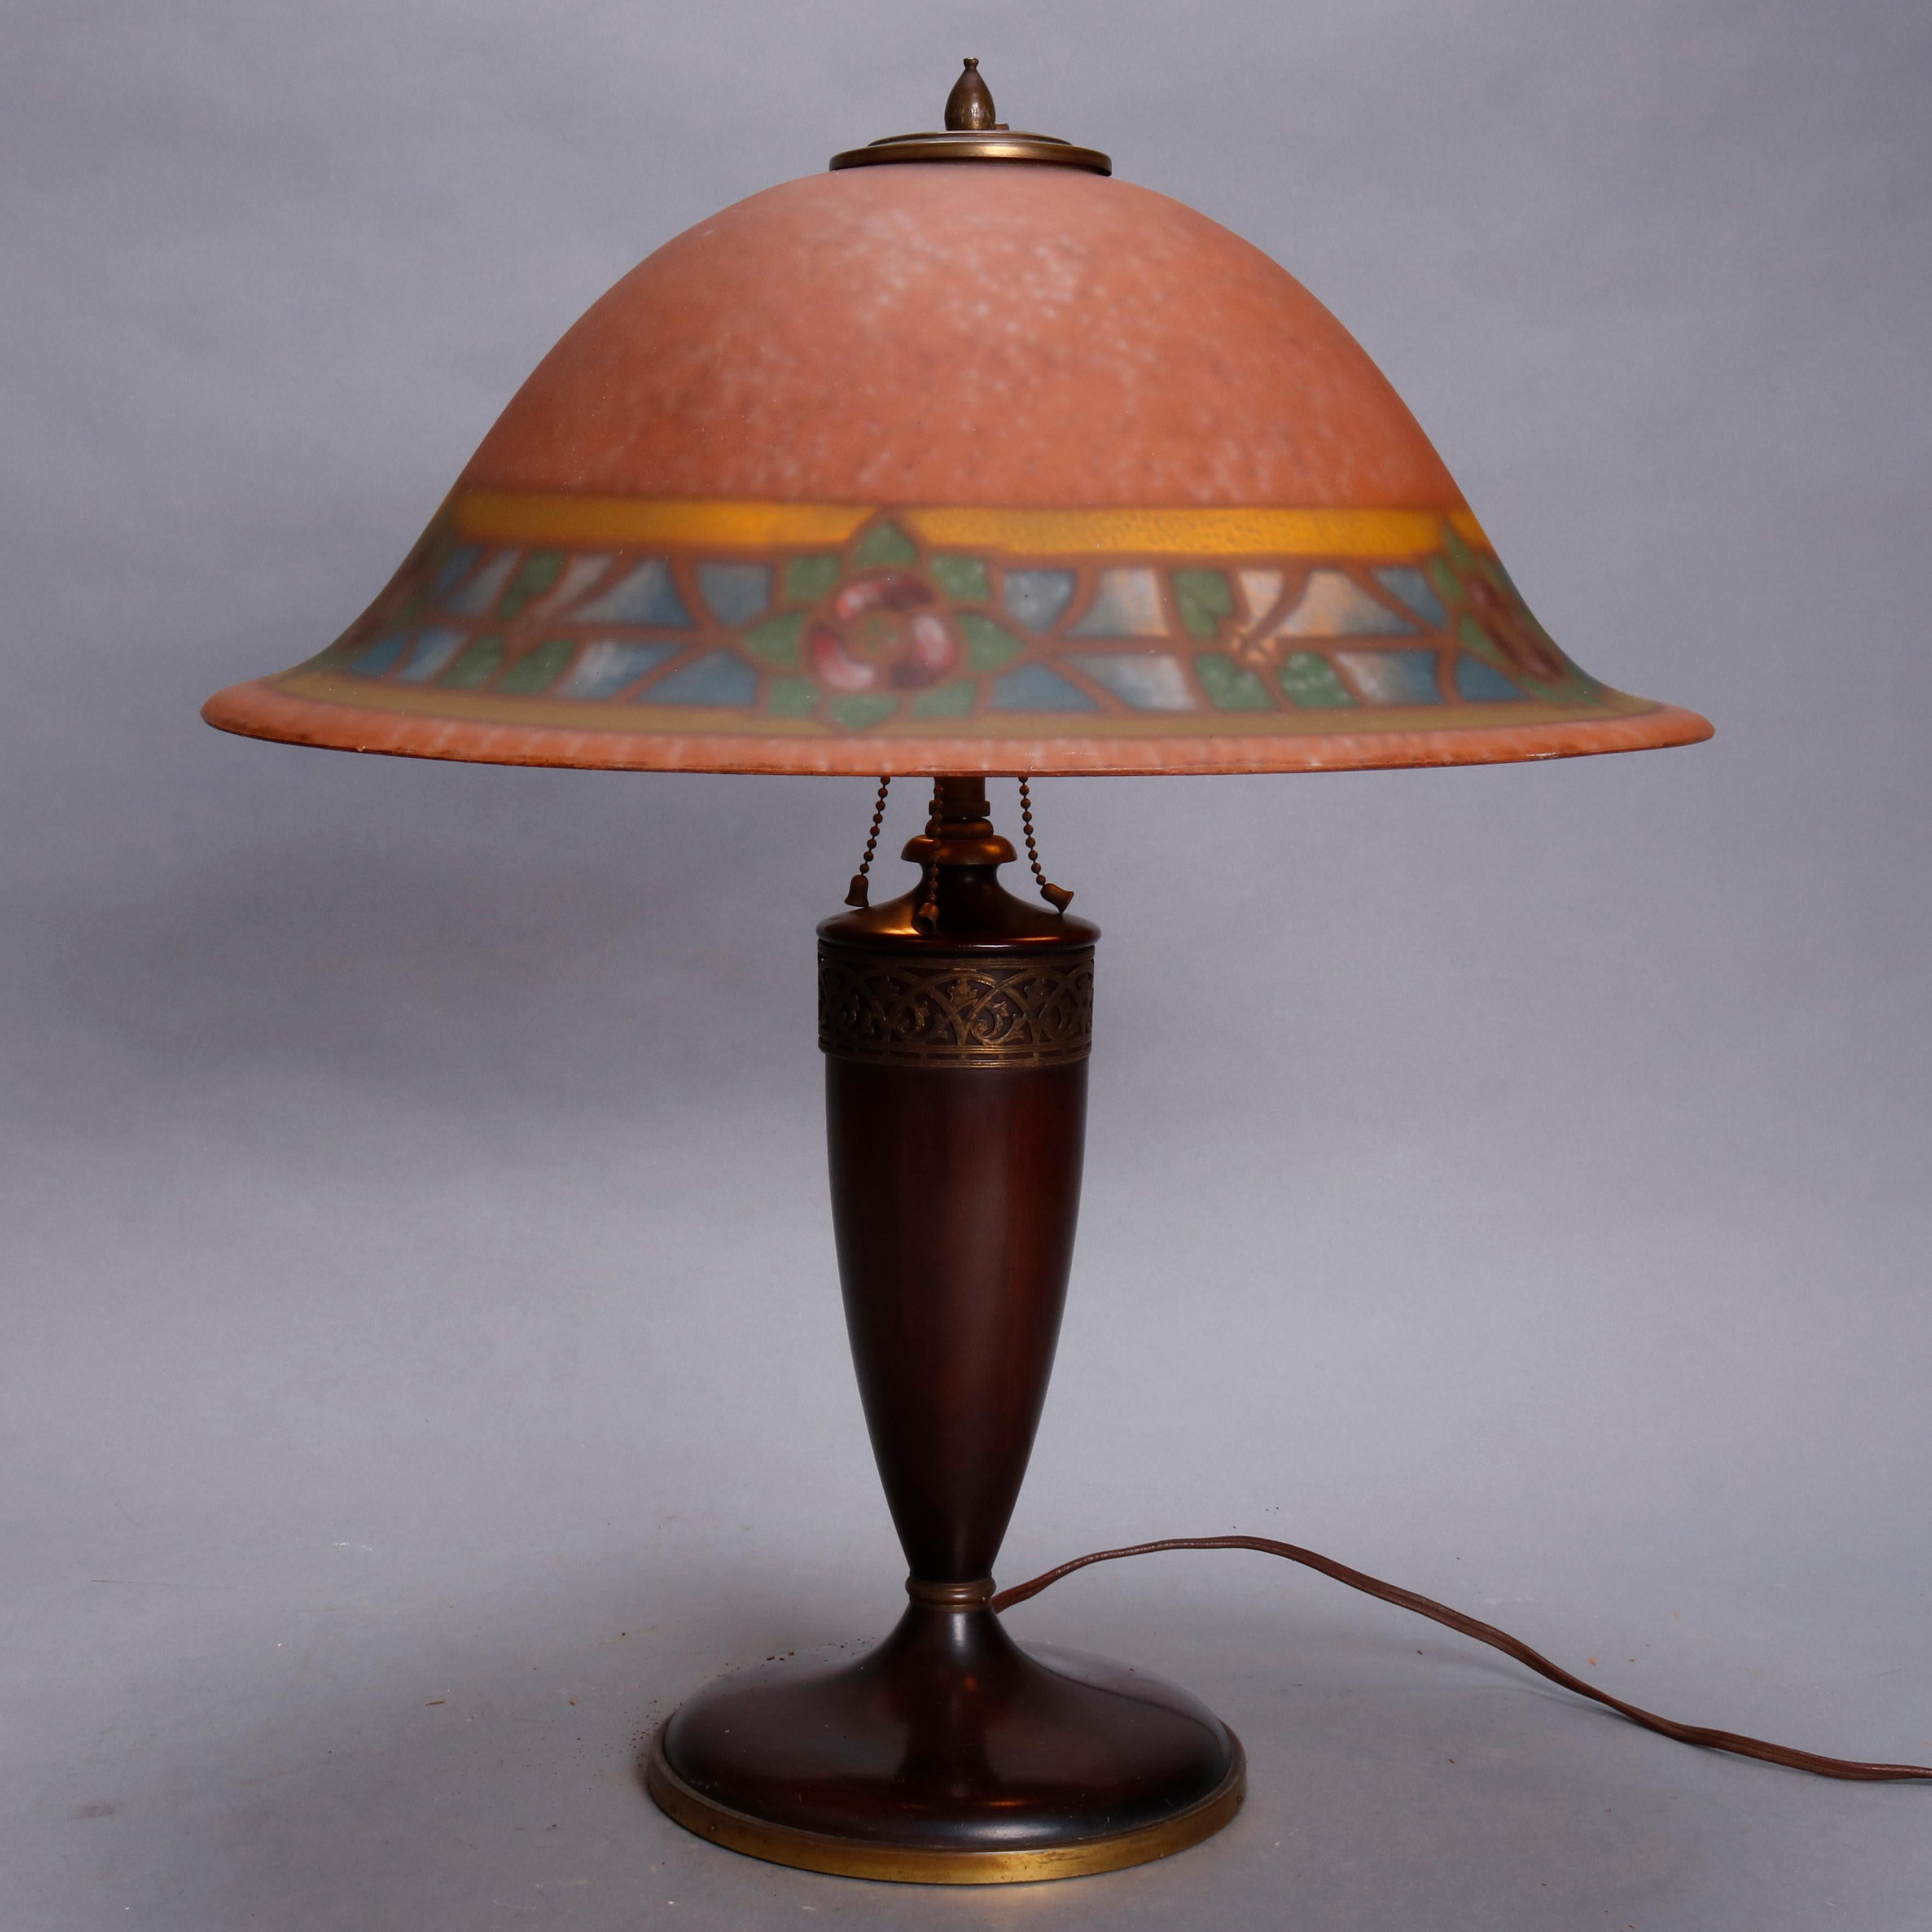 Arts & Crafts pairpoint lamp offer reverse painted bell form shade with stylized floral band over carved wood urn form triple socket base having scroll and foliate cast bronze collar, circa 1910.

Measures: 21.5